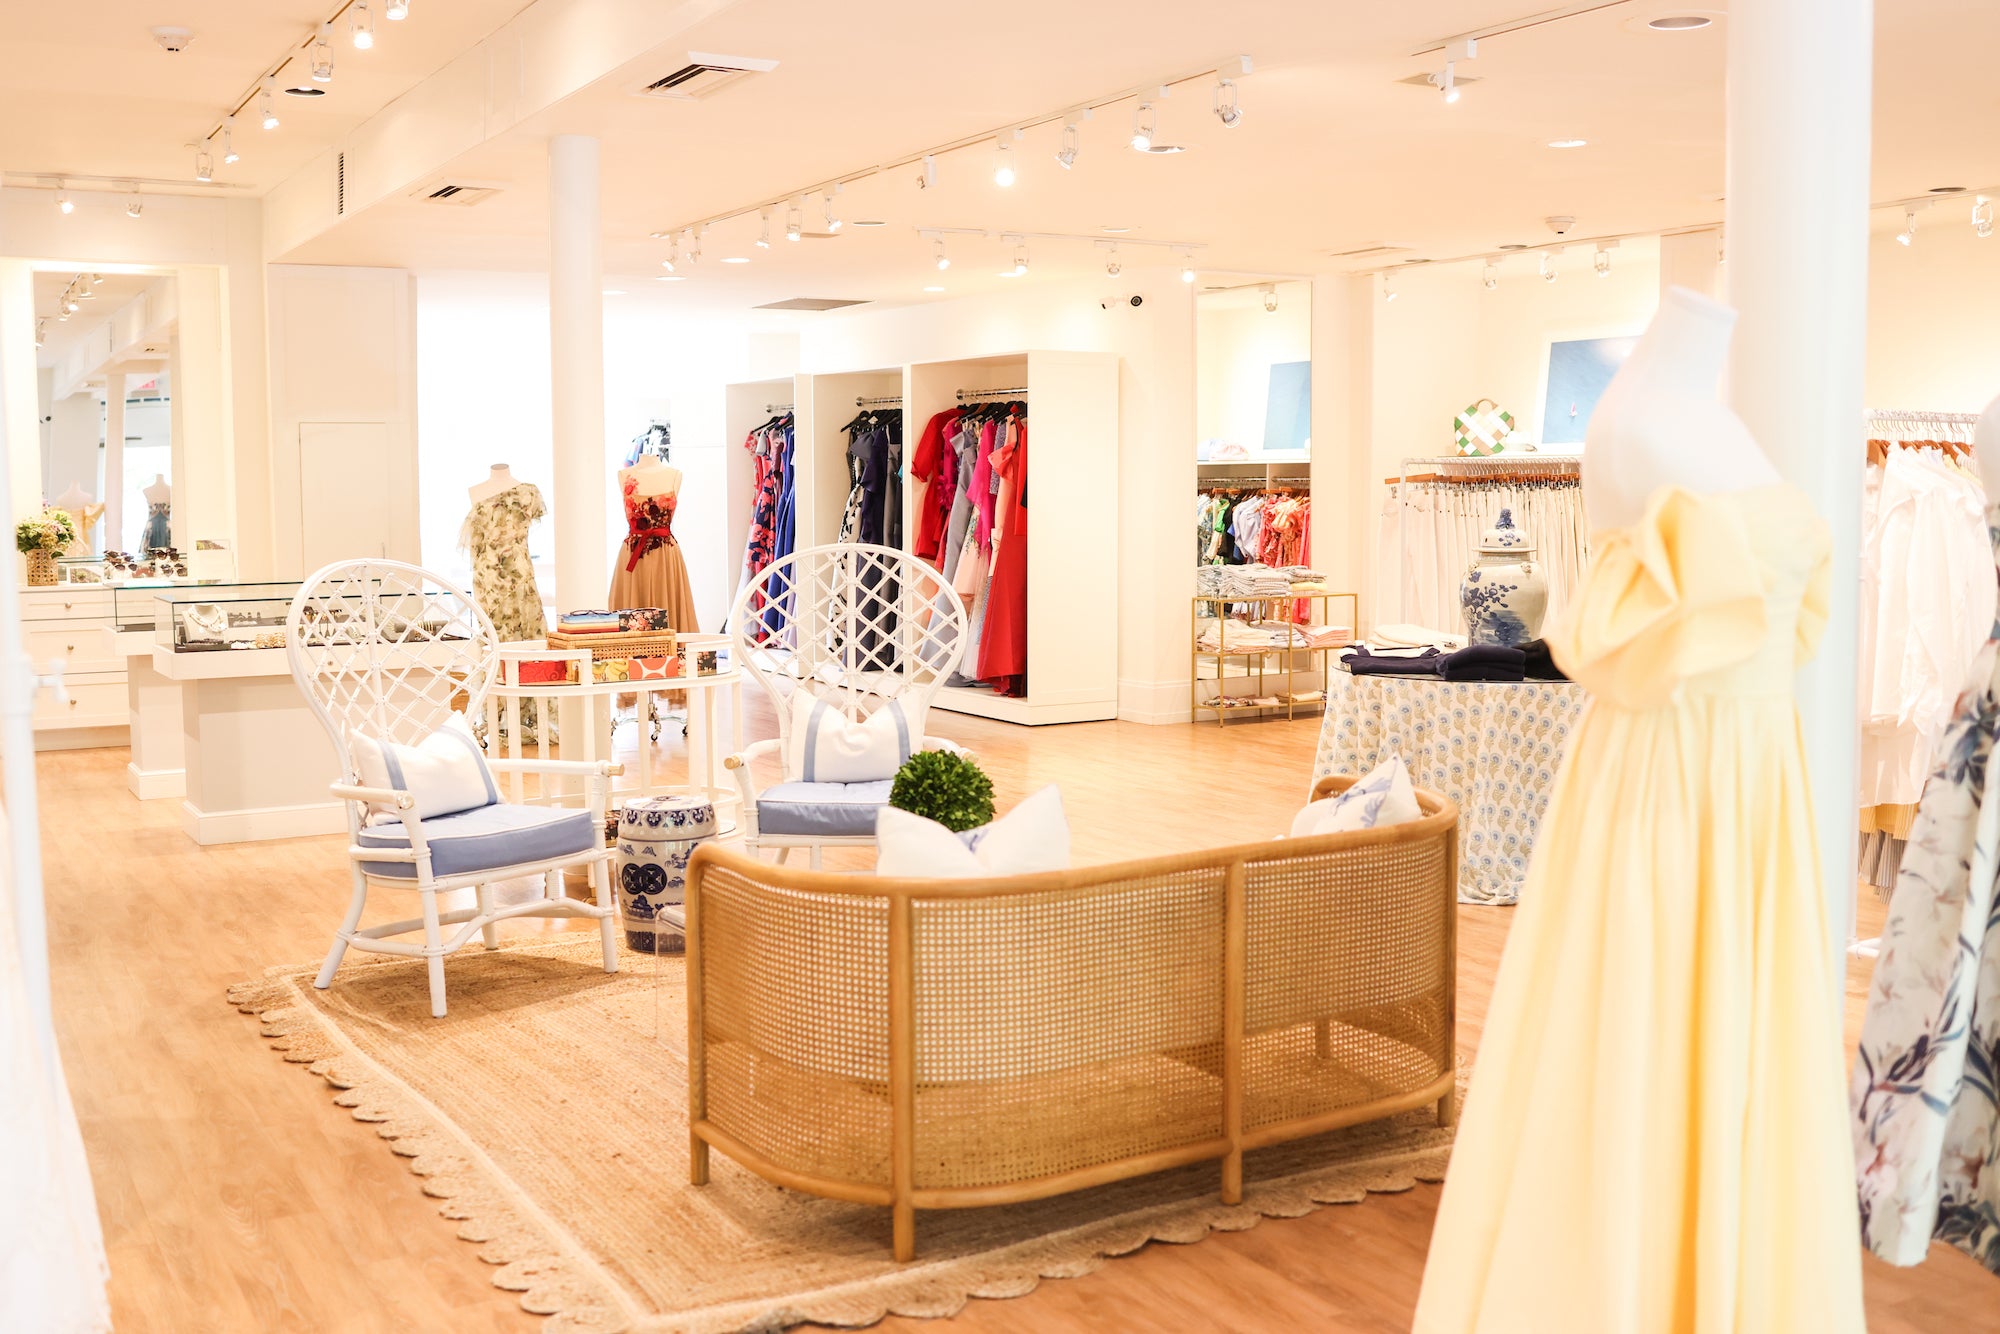 Designer clothing and jewelry boutiques in modern shopping plaza